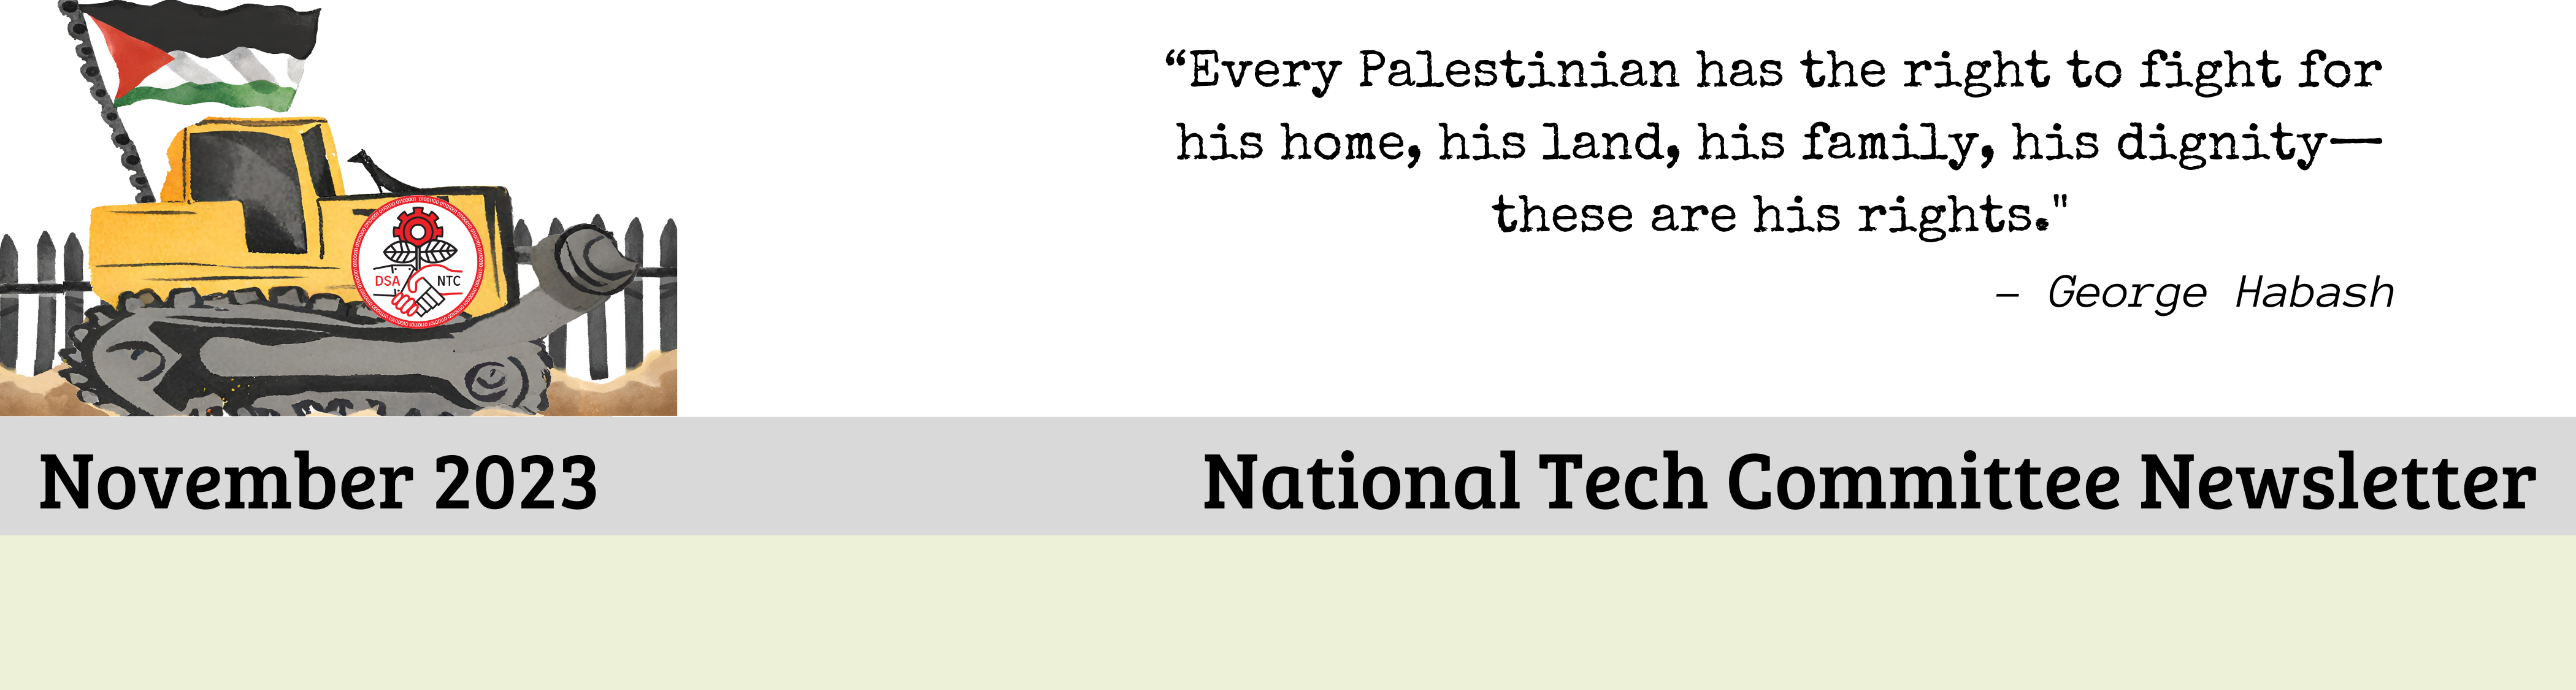 Every Palestinian has the right to fight for<br />
his home, his land, his family, his dignity—<br />
these are his rights.<br />
- George Habash<br />
November 2023 National Tech Committee Newsletter